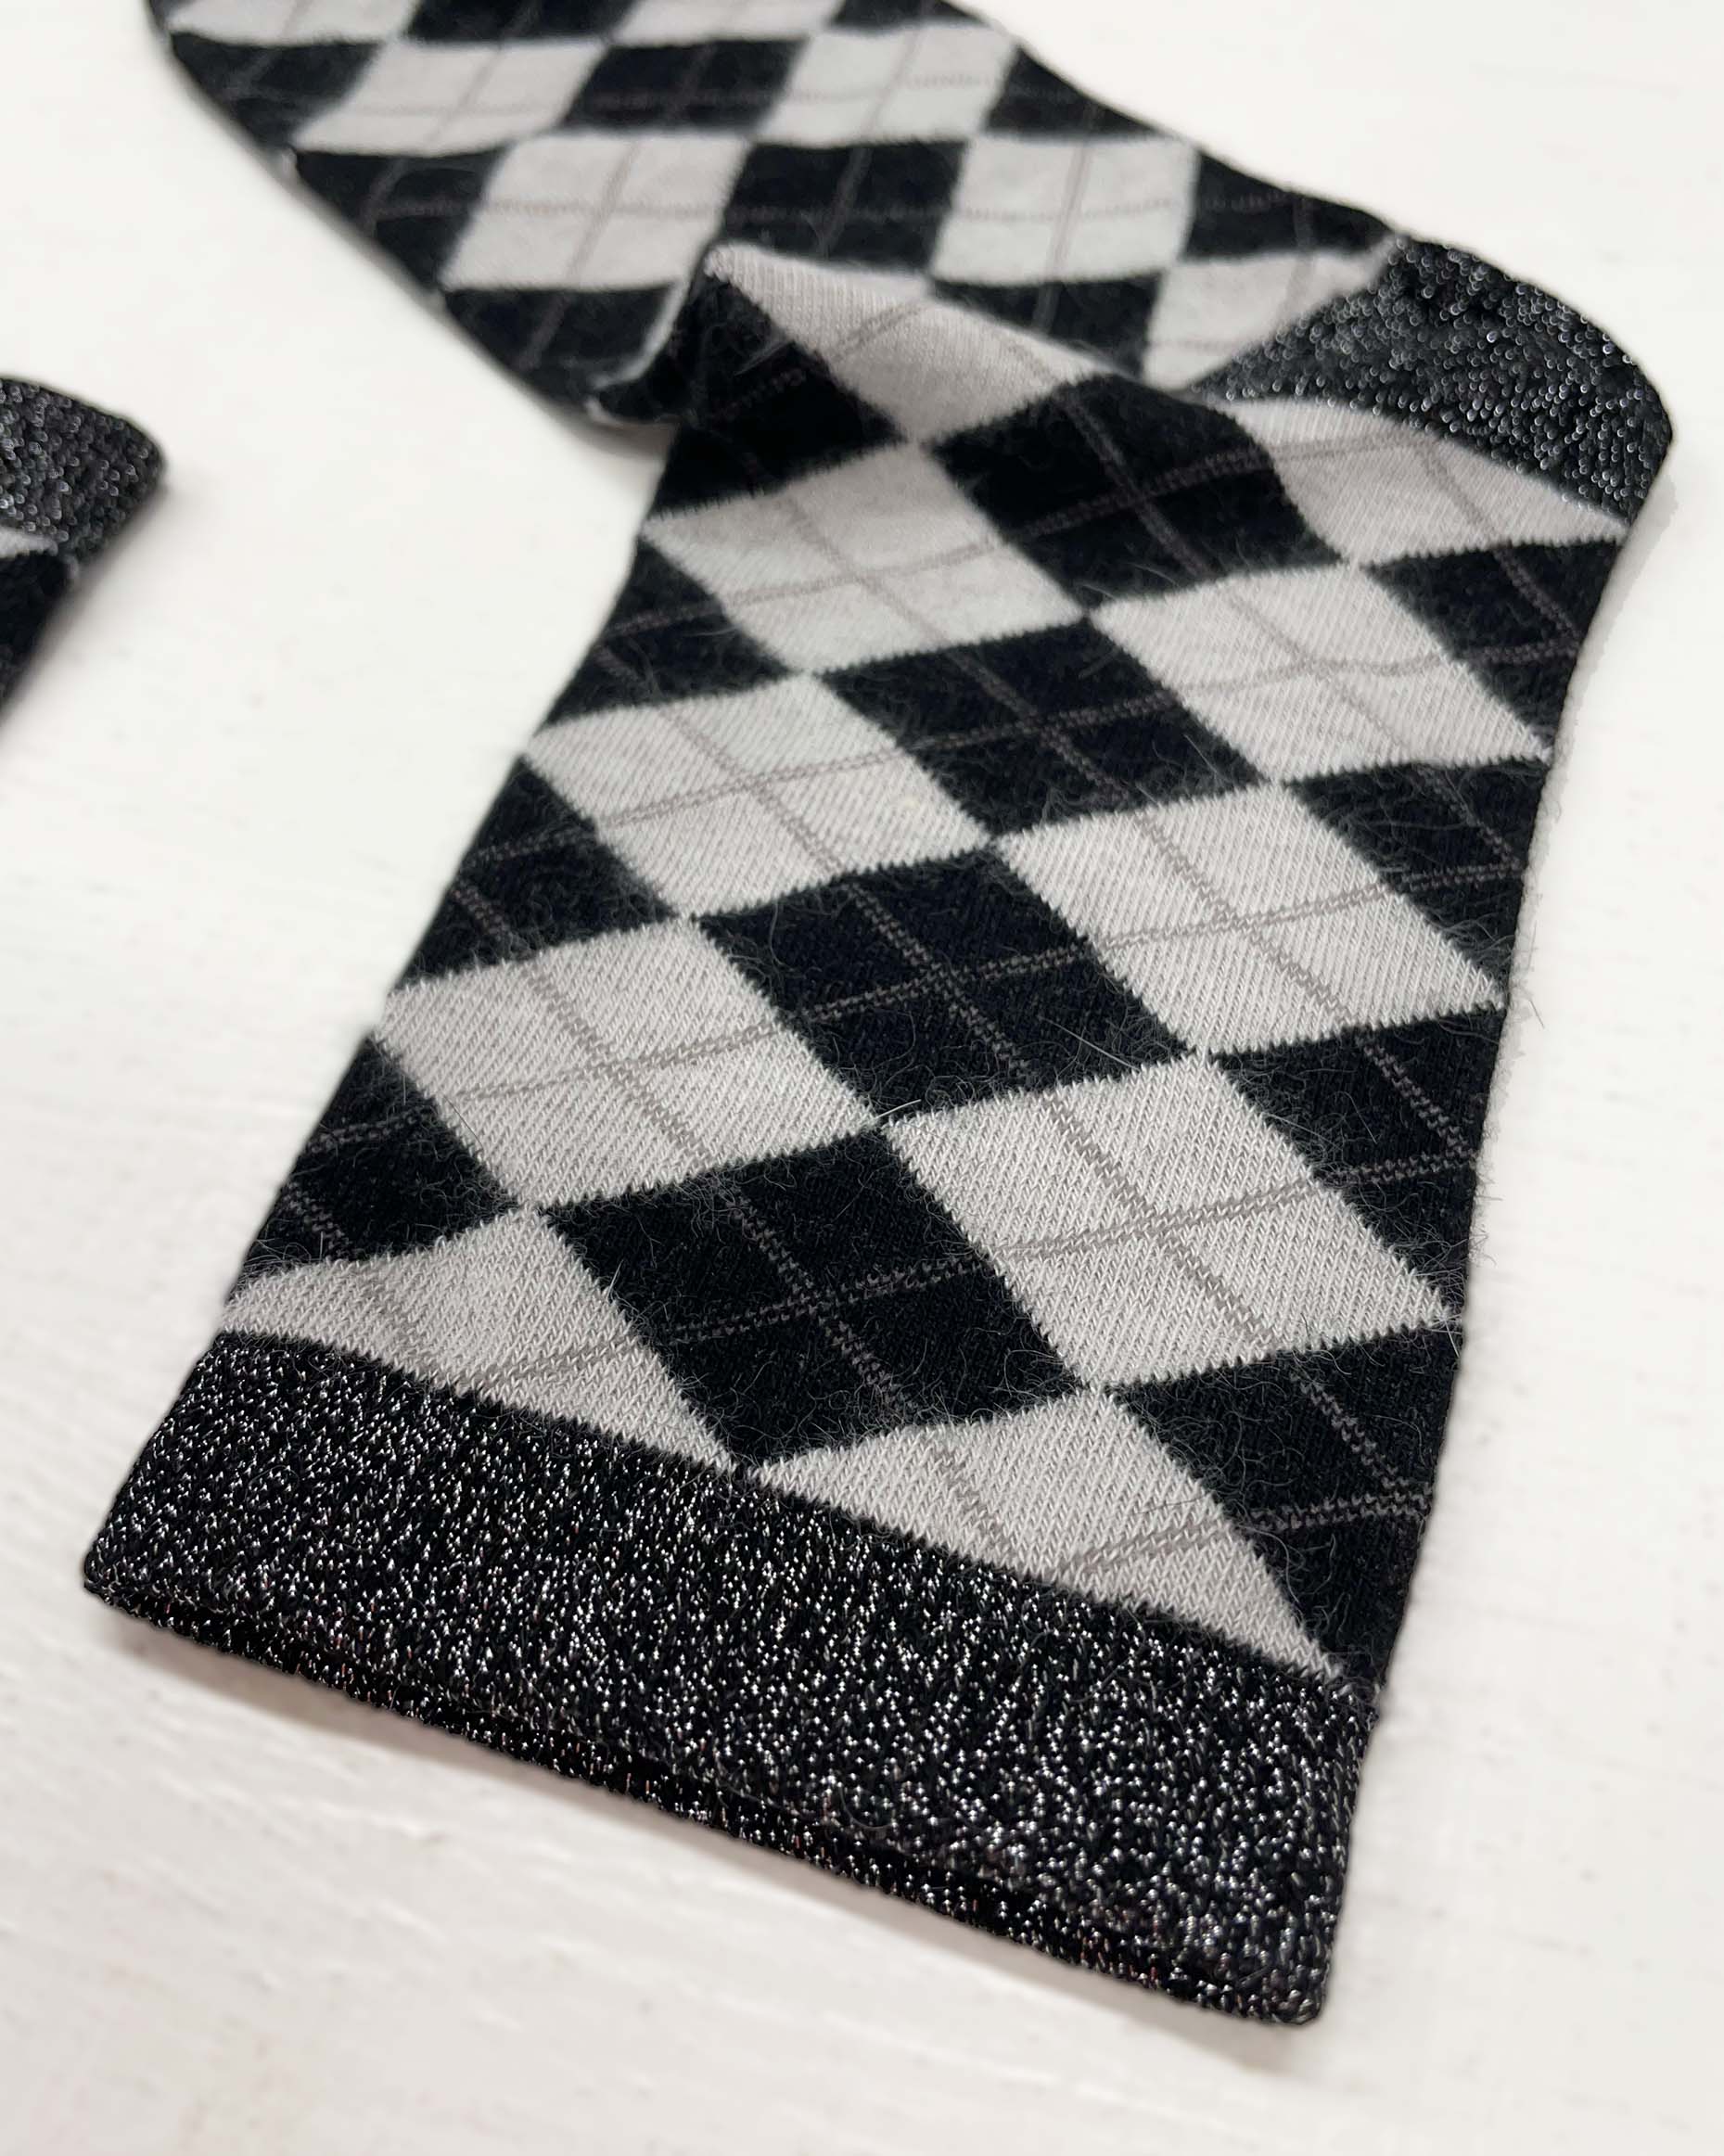 SiSi Scottish Sock Detail - Warm and soft angora mix ankle socks with a diamond tartan / argyle pattern in black and light grey with silver lamé cuff, heel and toe.